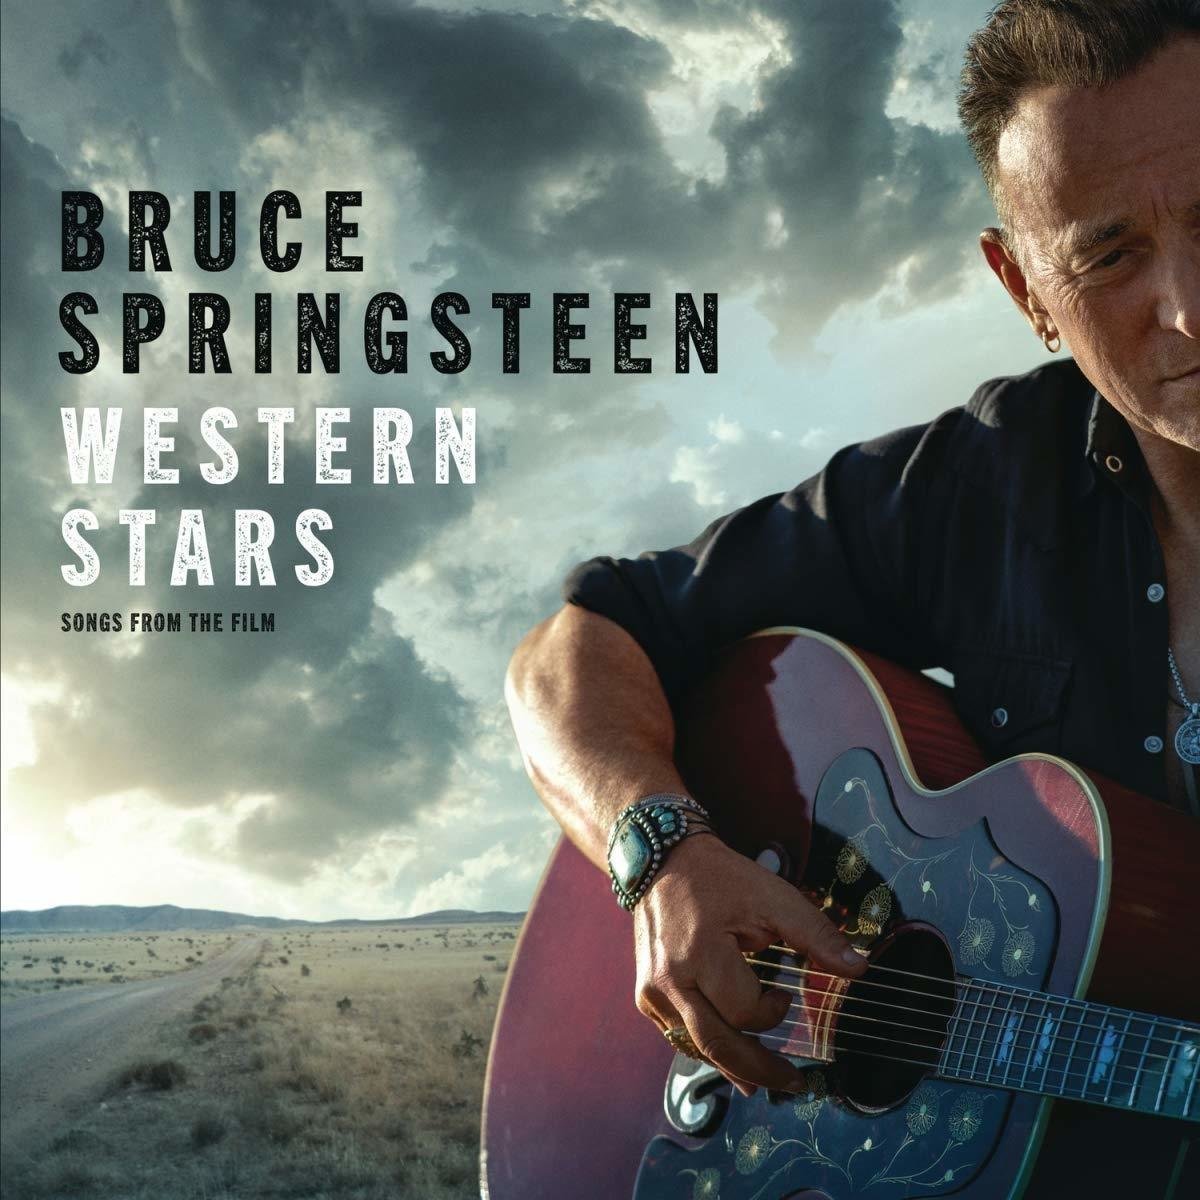 LP Bruce Springsteen Western Stars - Songs From the Film (2 LP)